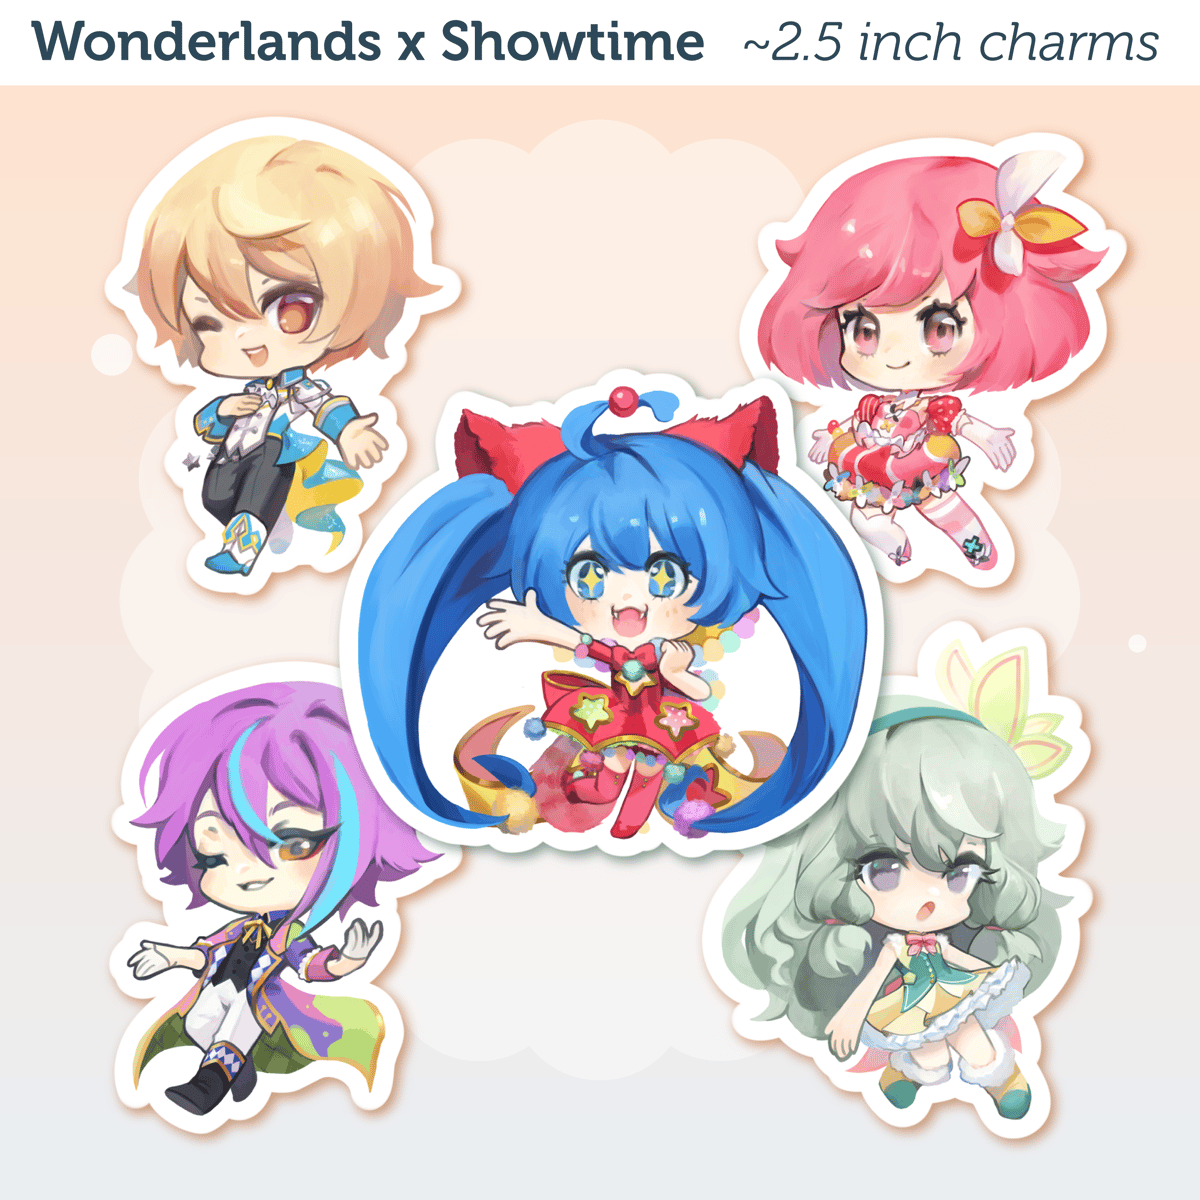 Image of Wonderlands x Showtime 2.5" Charms